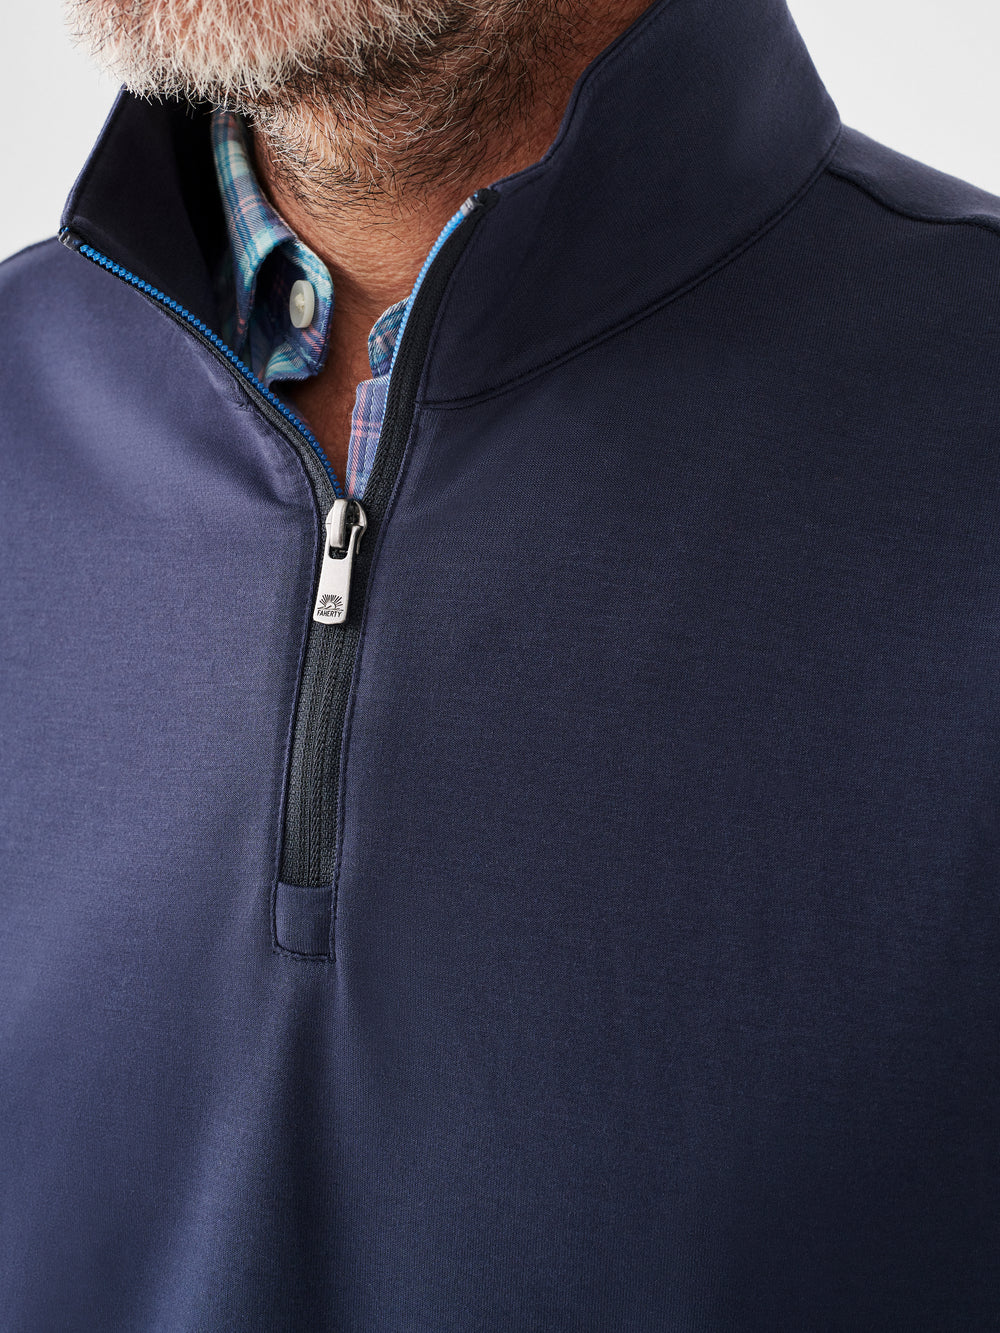 Load image into Gallery viewer, Faherty Movement Quarter Zip - Blue Nights
